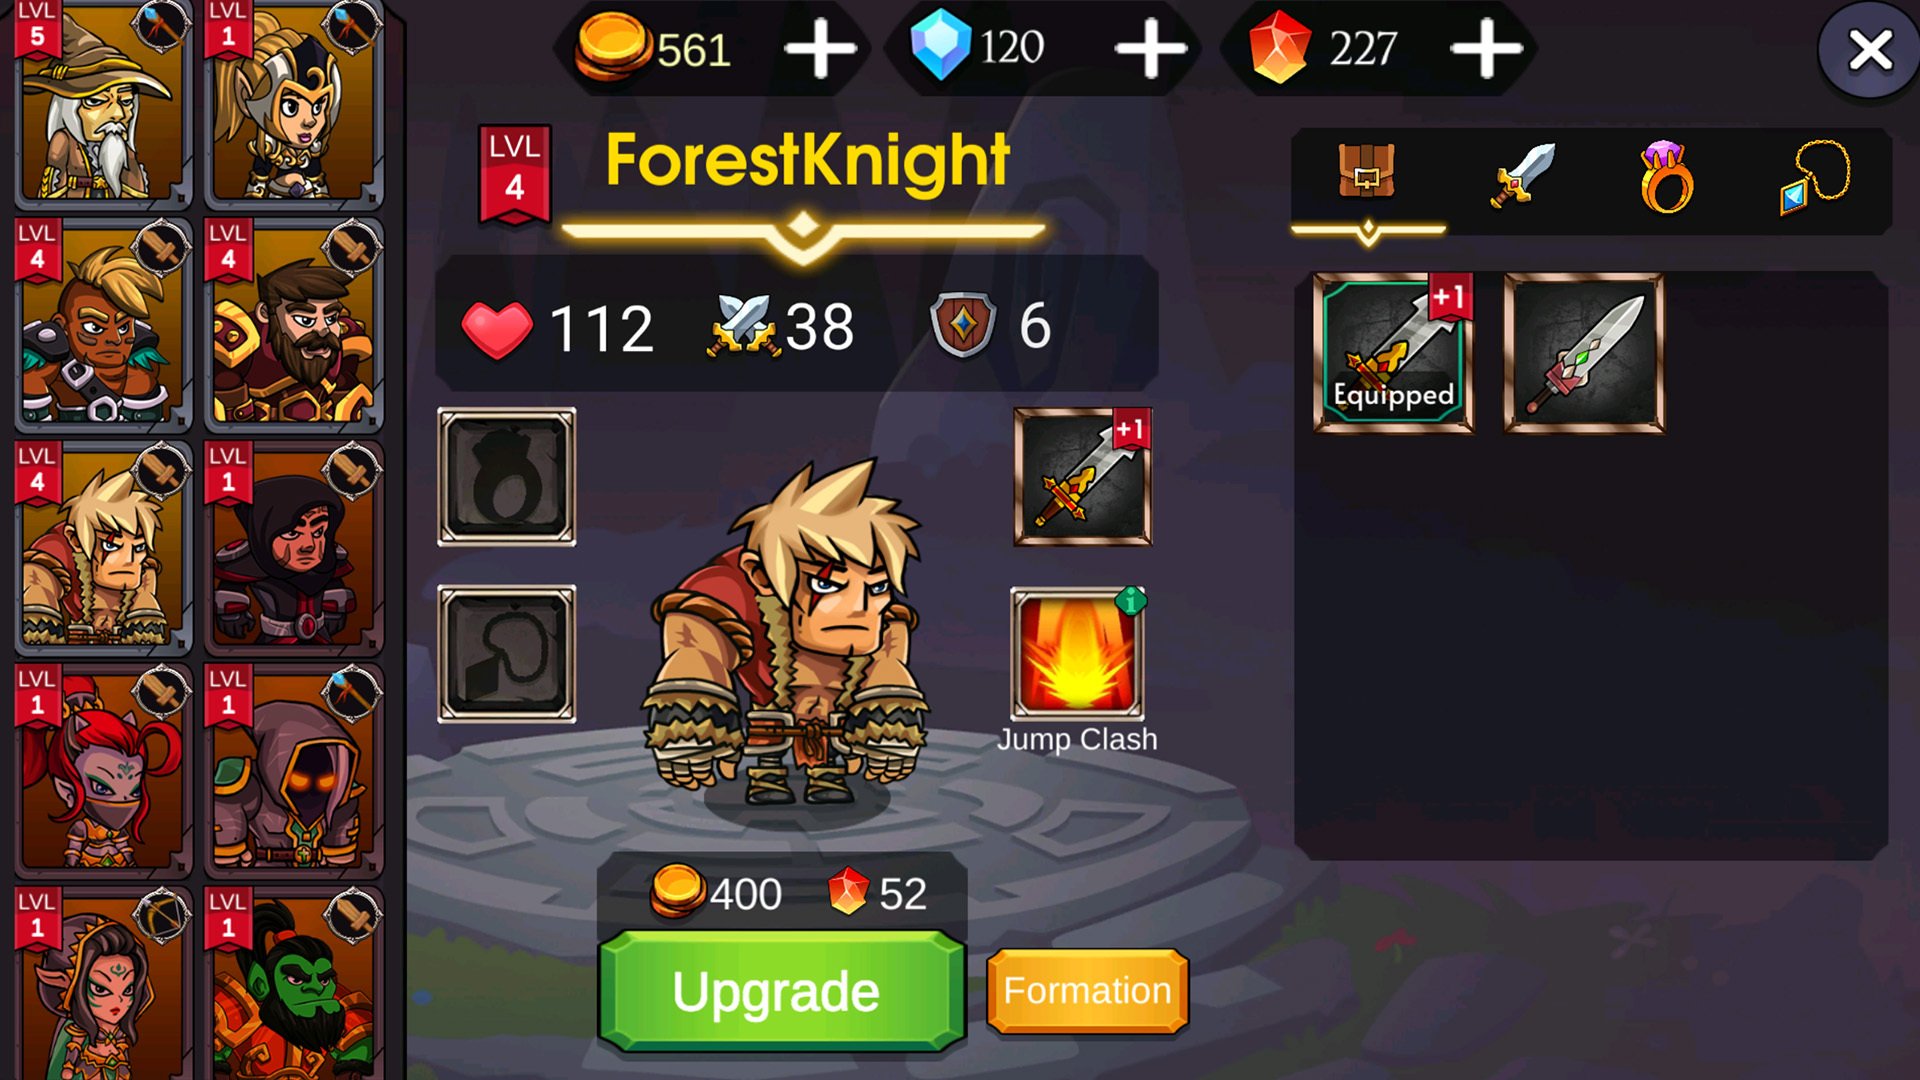 forest knight game